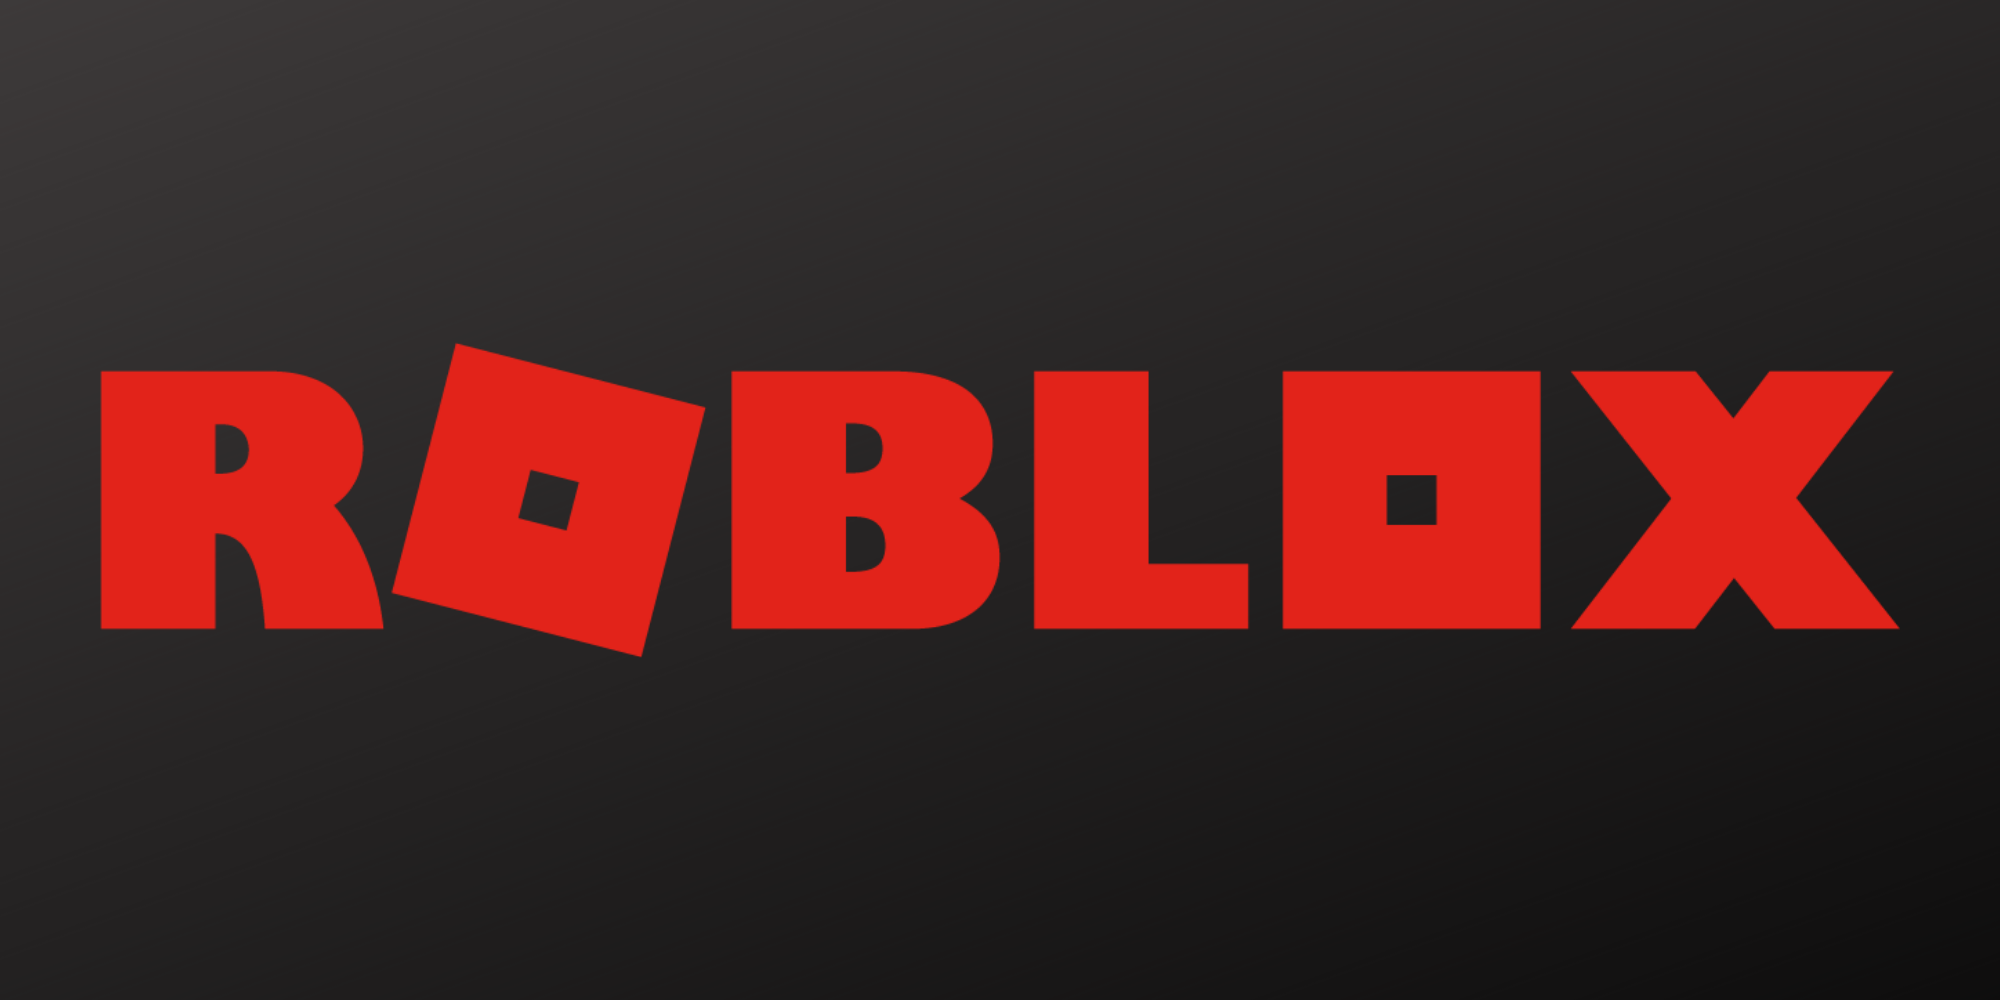 Eyeing An Entry Into China Roblox Enters Strategic Partnership With Tencent Digital Media Wire - 2000 roblox